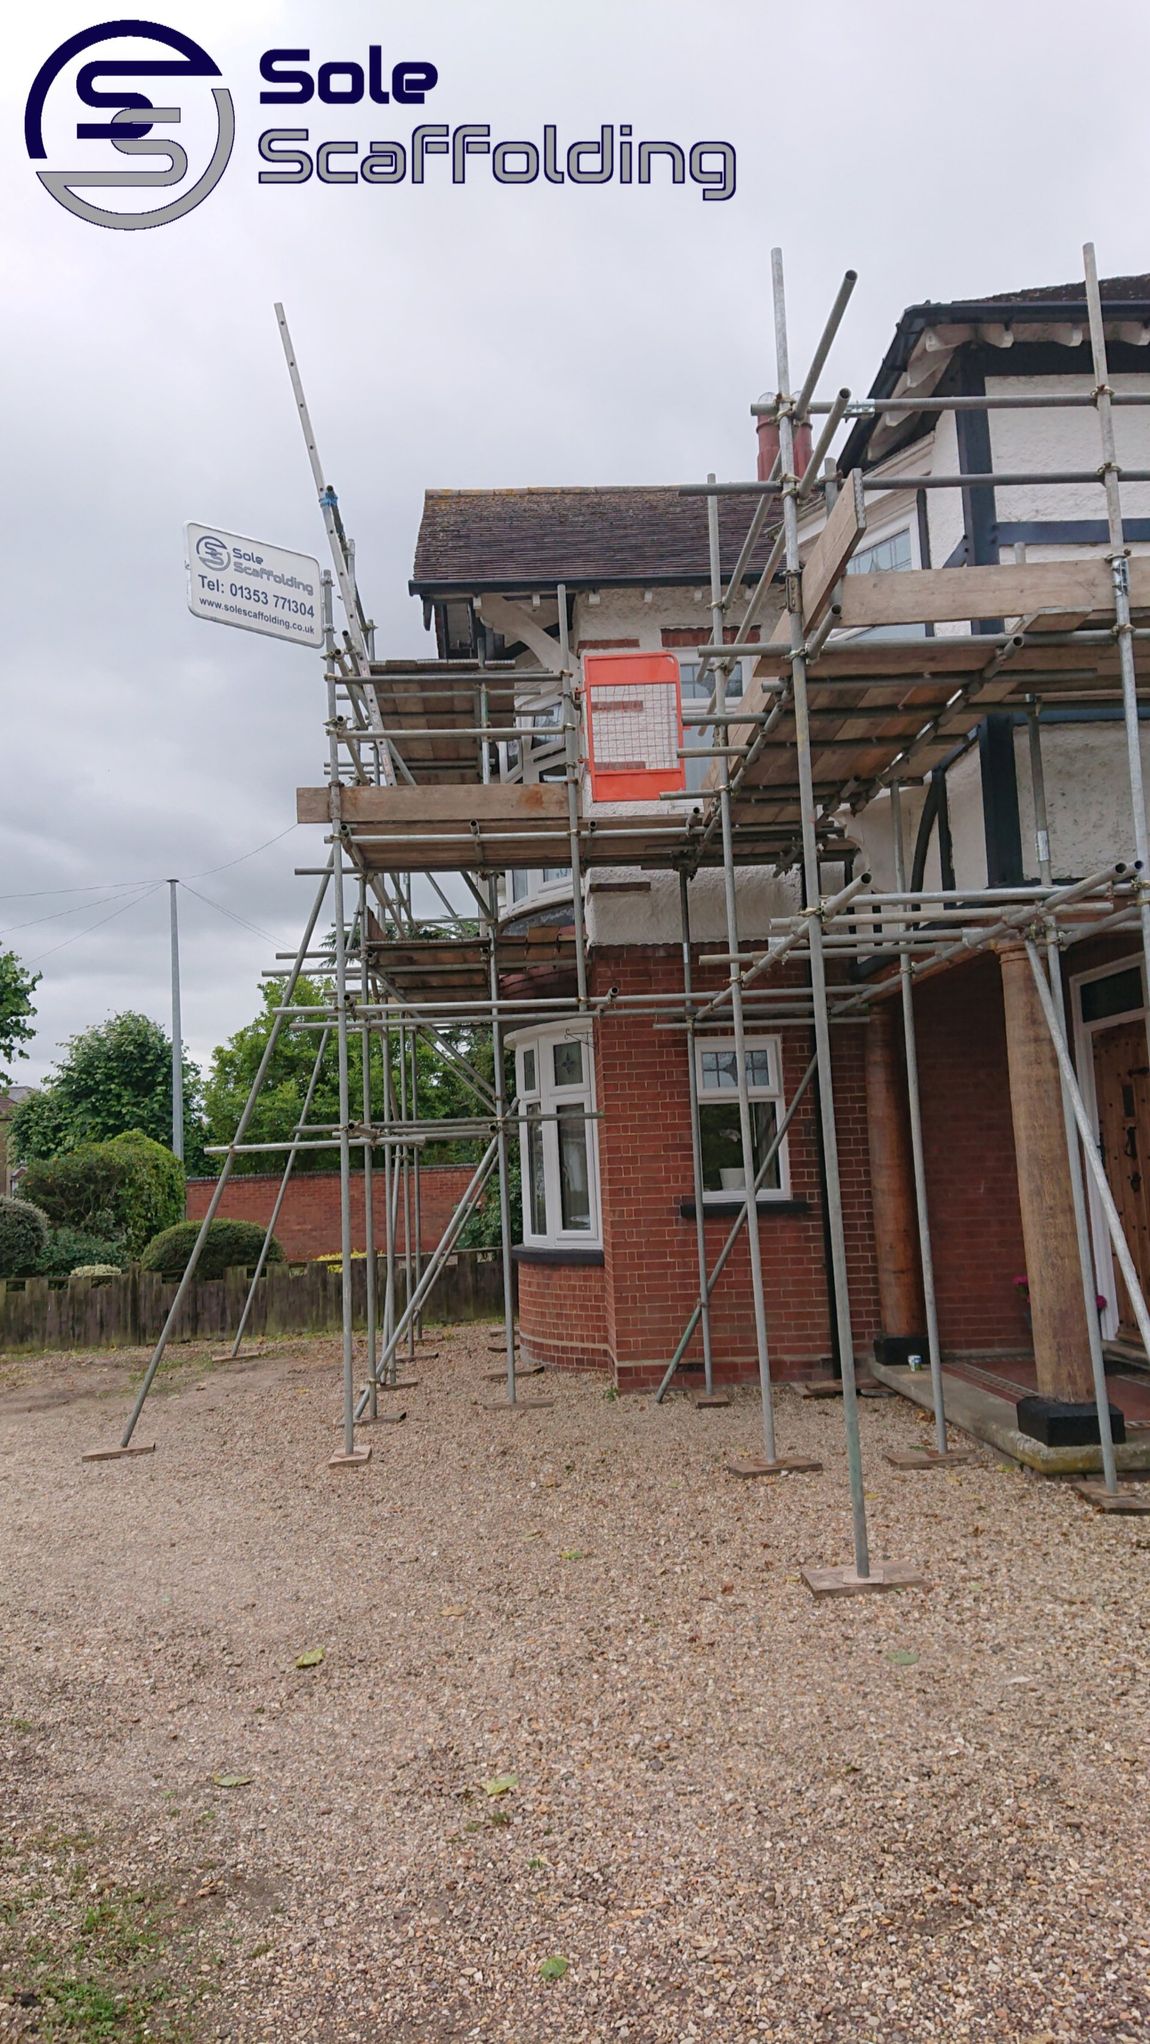 sole scaffolding - scaffold for painting works on a house in March